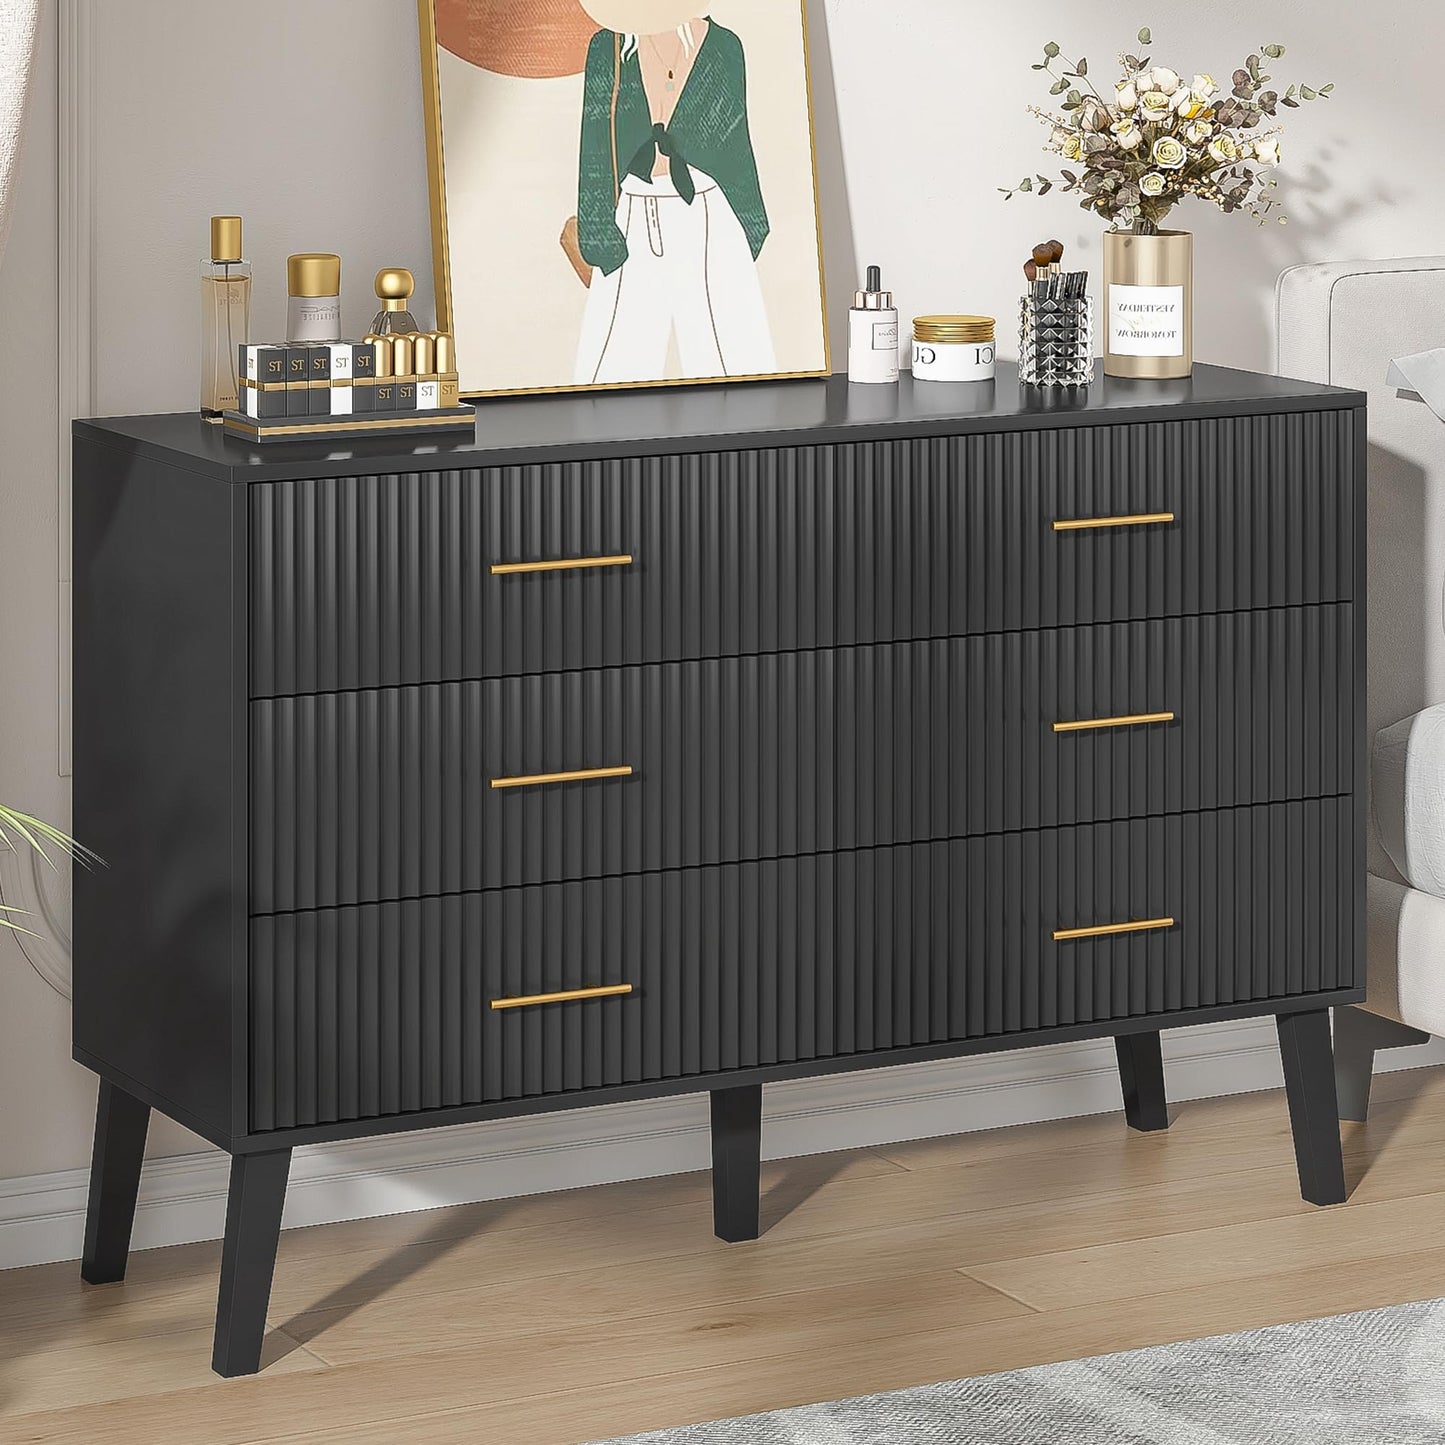 Fiogmub Accent 6 Drawer Dresser, Modern Closet Dressers Chest of Drawers with Fluted Panel, Living Room Bedroom Nursery Entryway and Hallway